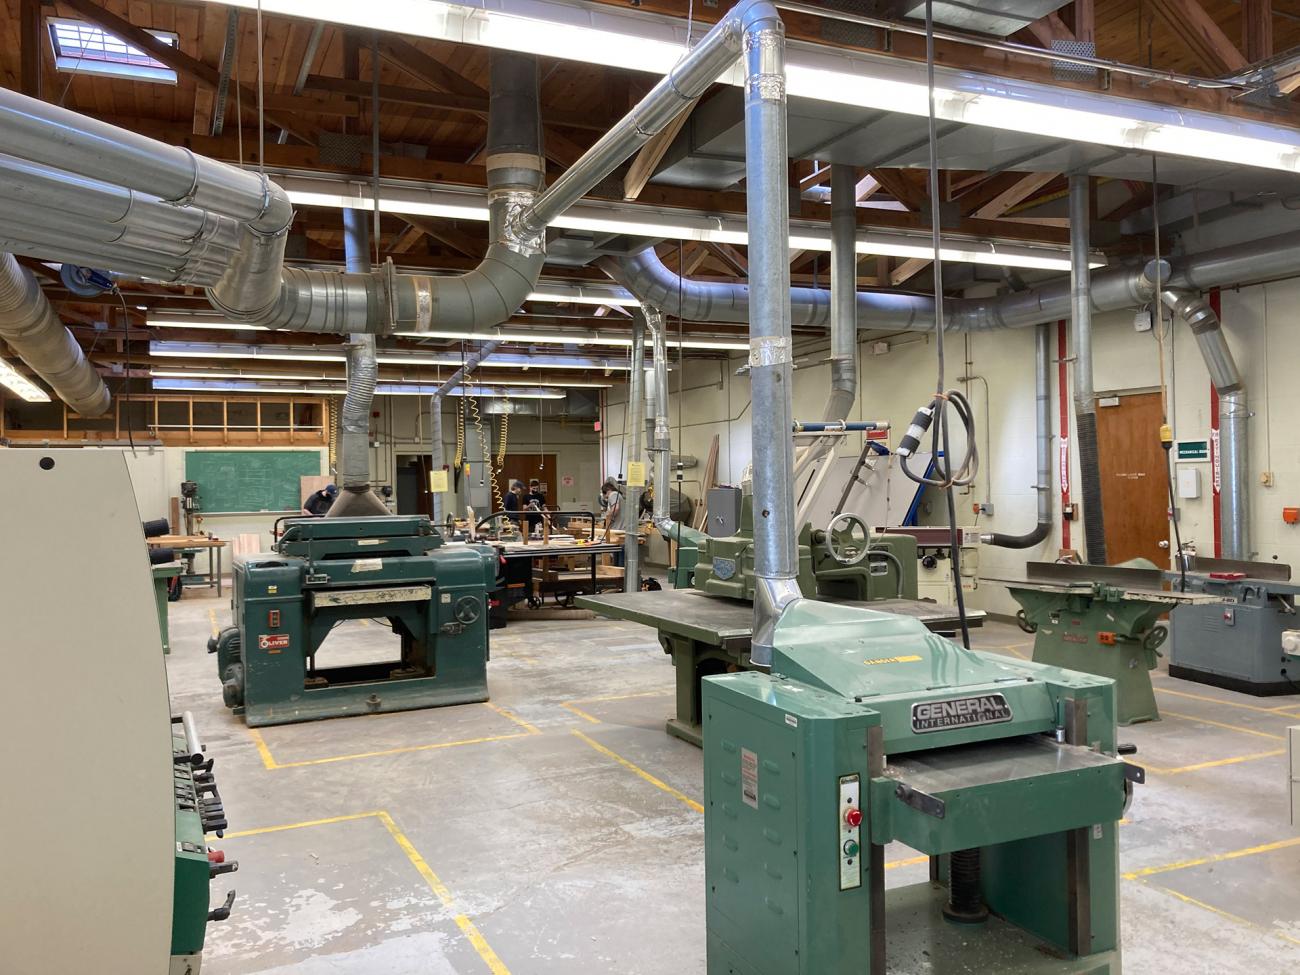 Equipment in the Wood Products Technology Center